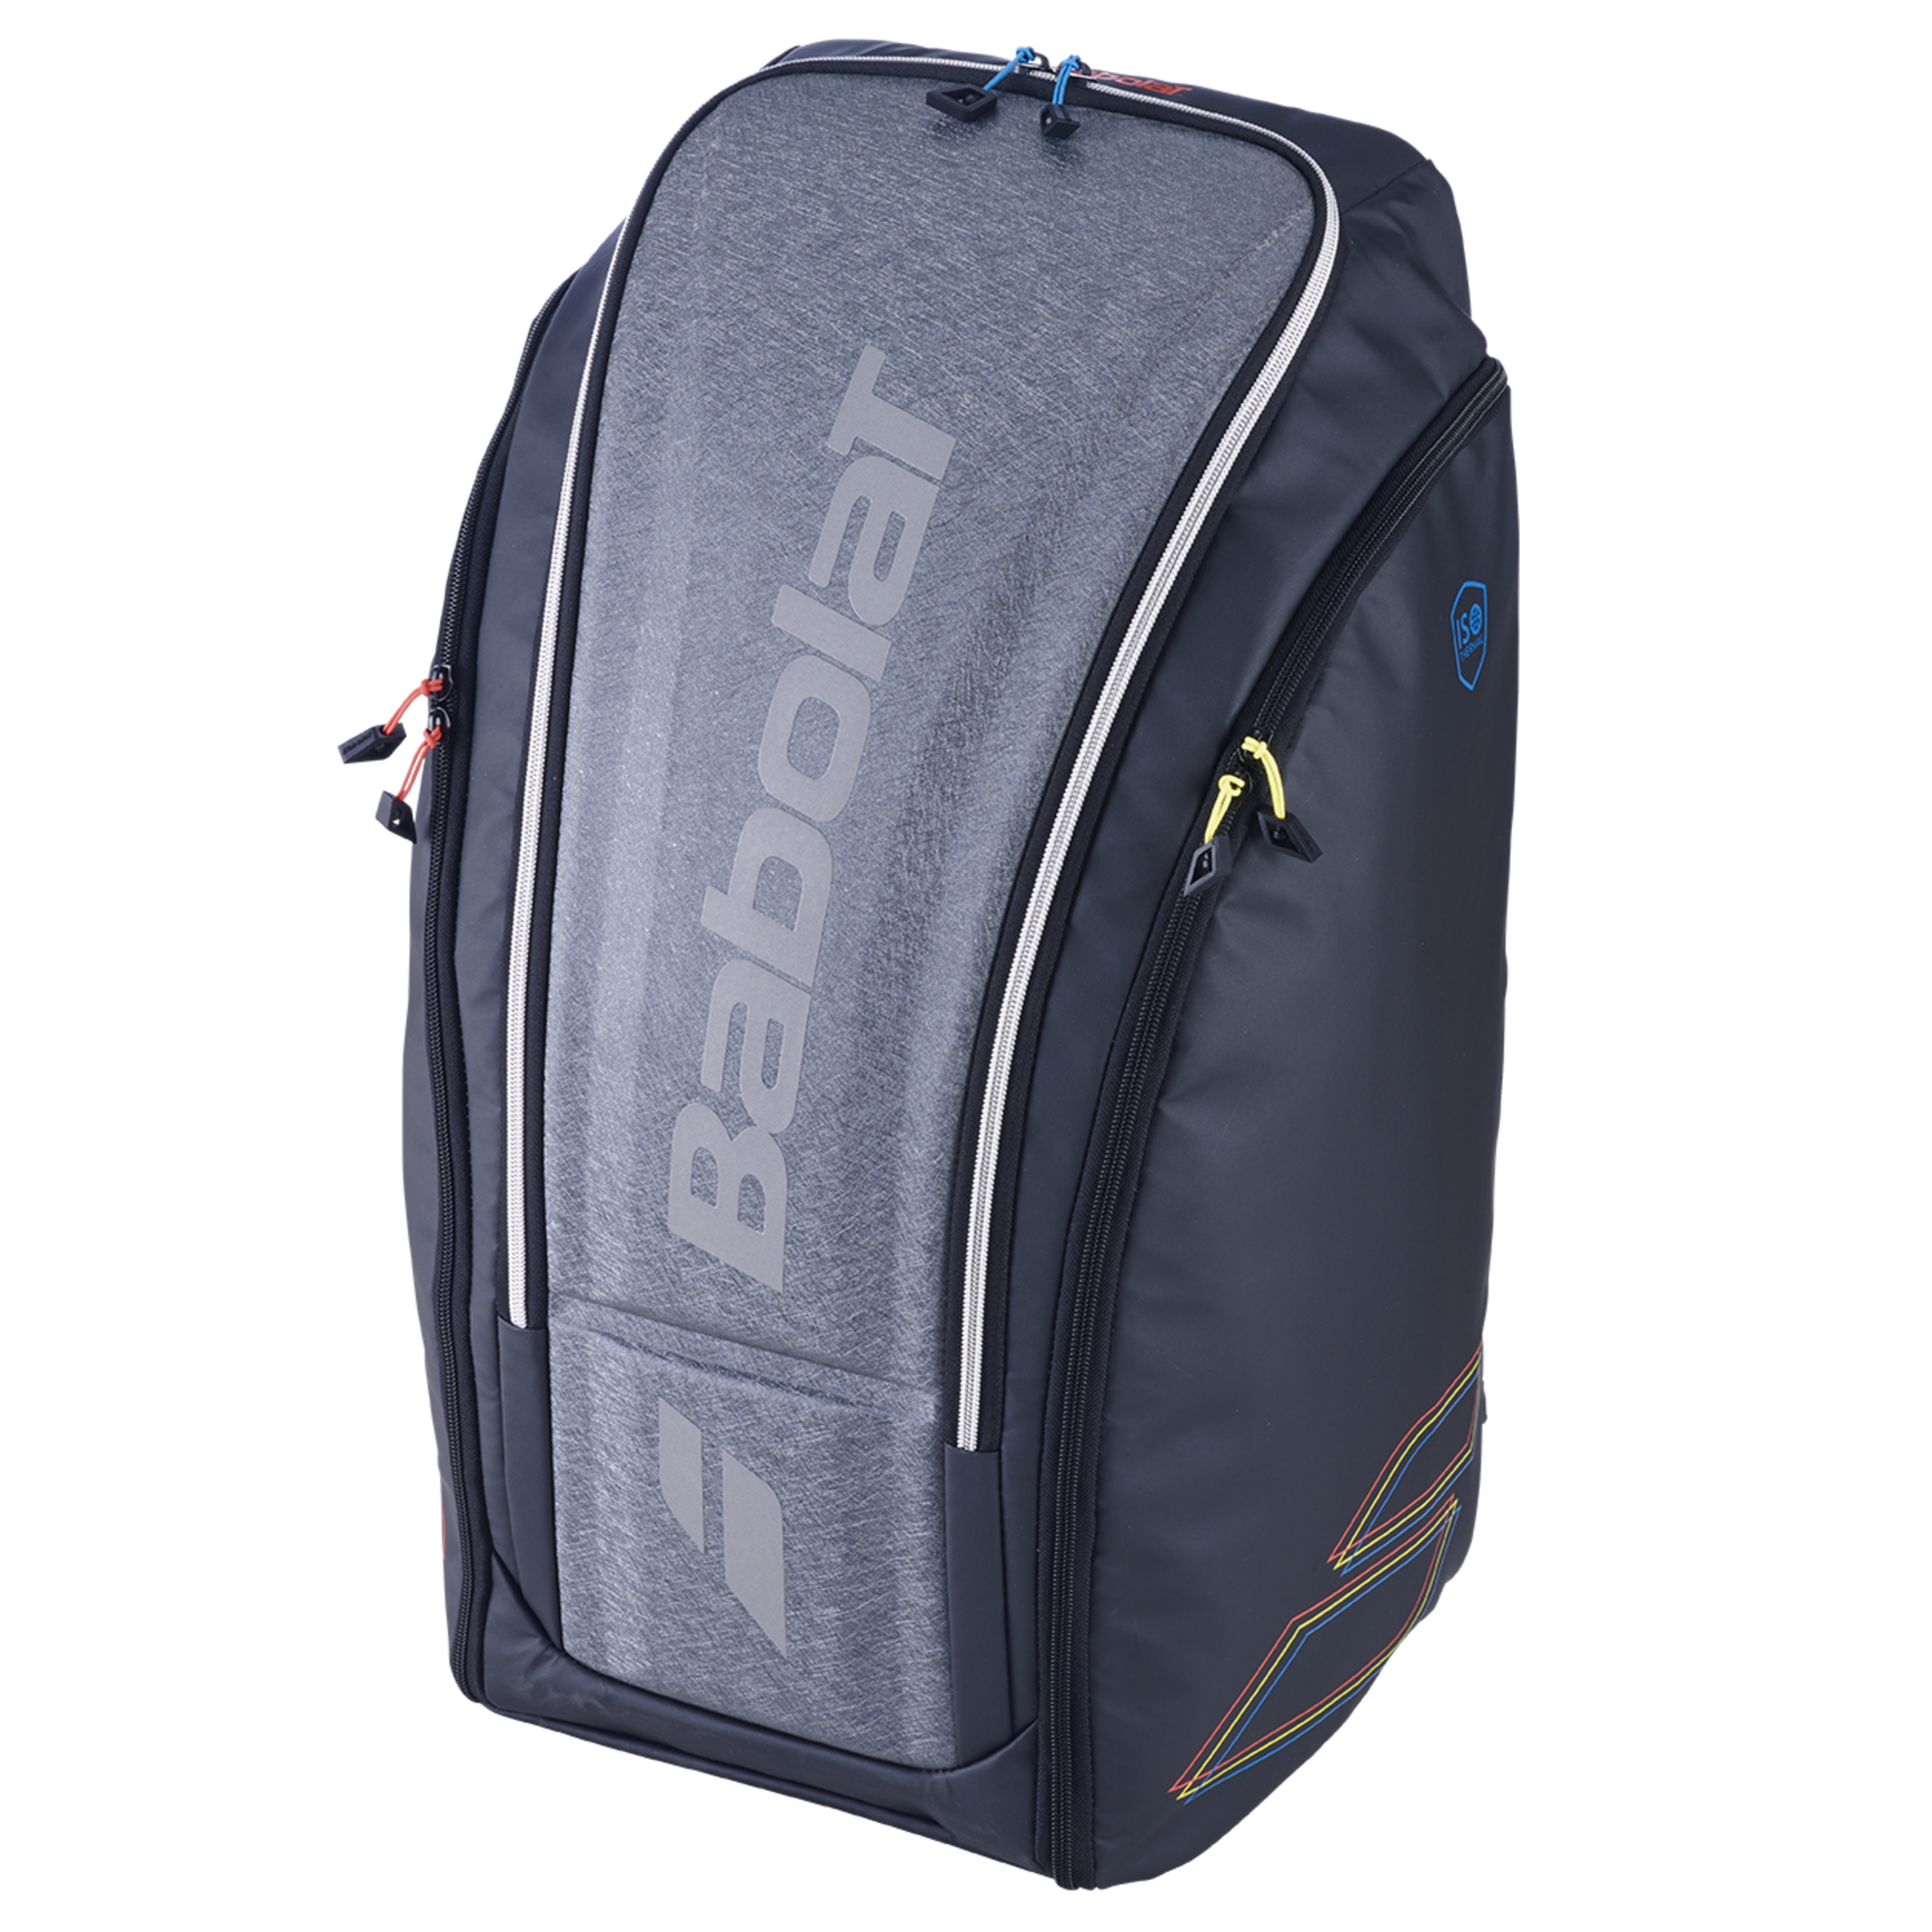 Products - Padel Bags